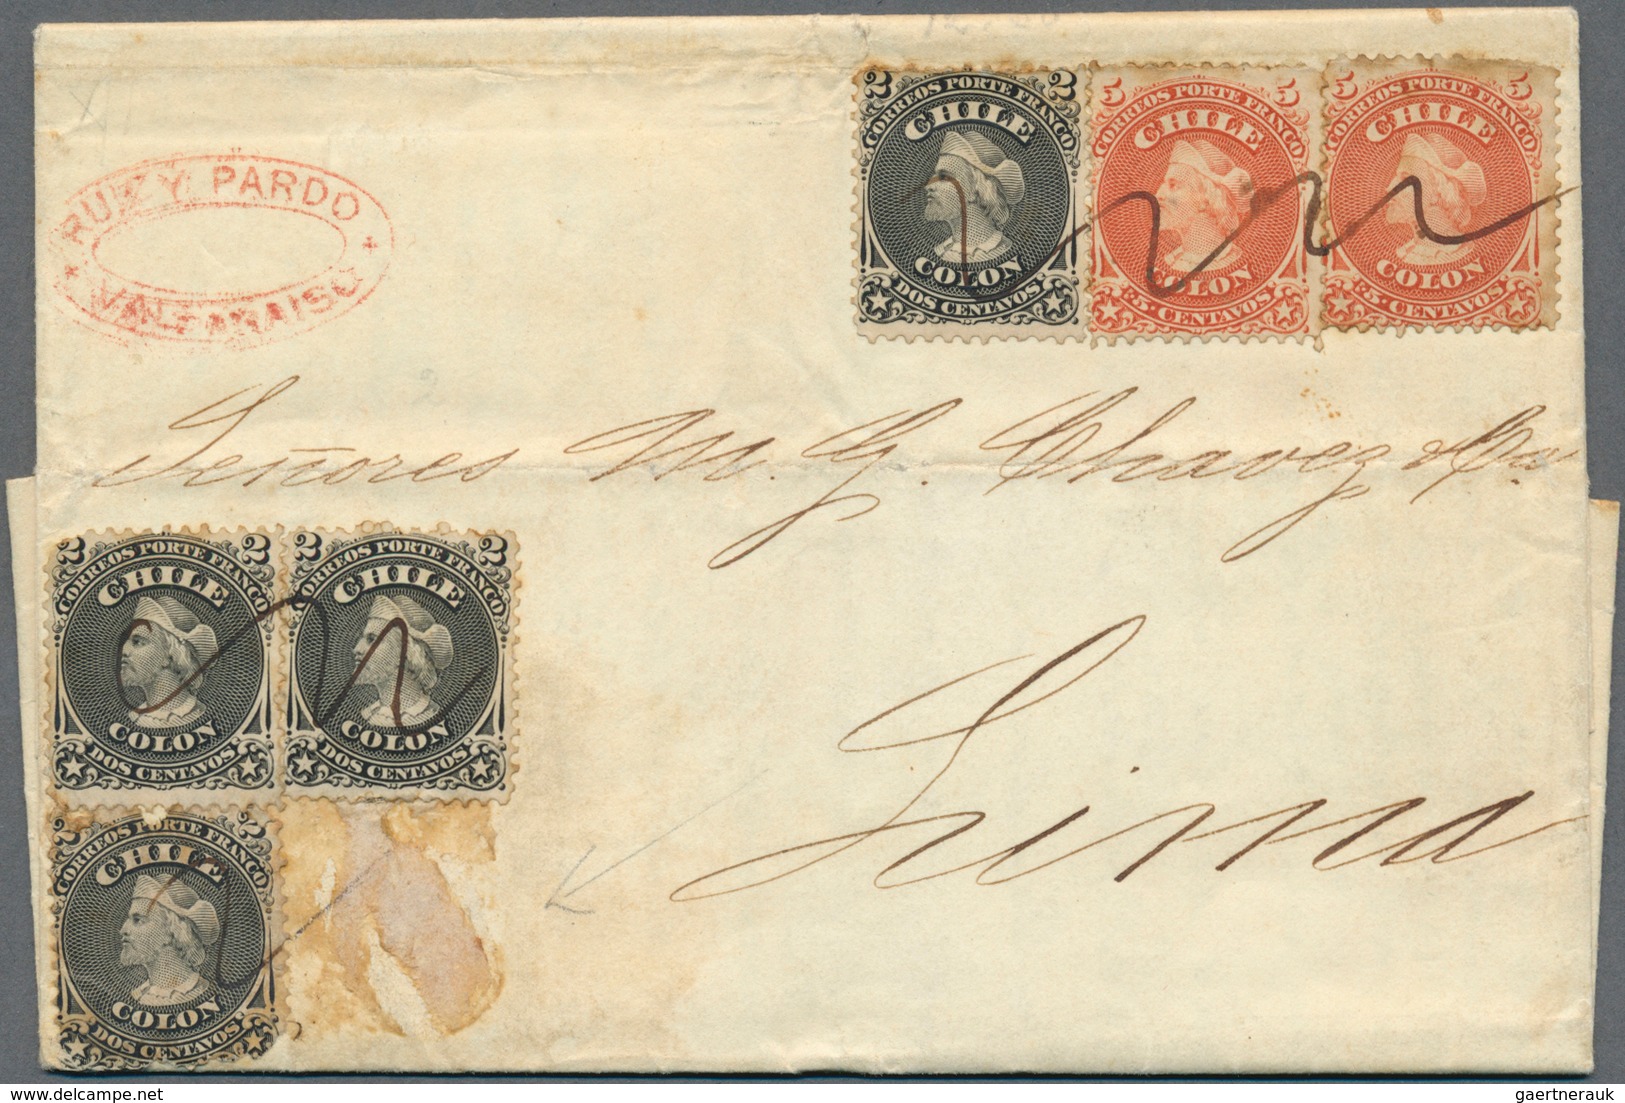 00593 Chile: 1853/1867, COLON HEADS, the outstanding collection of first issues incl. 1853 5c. used on ent